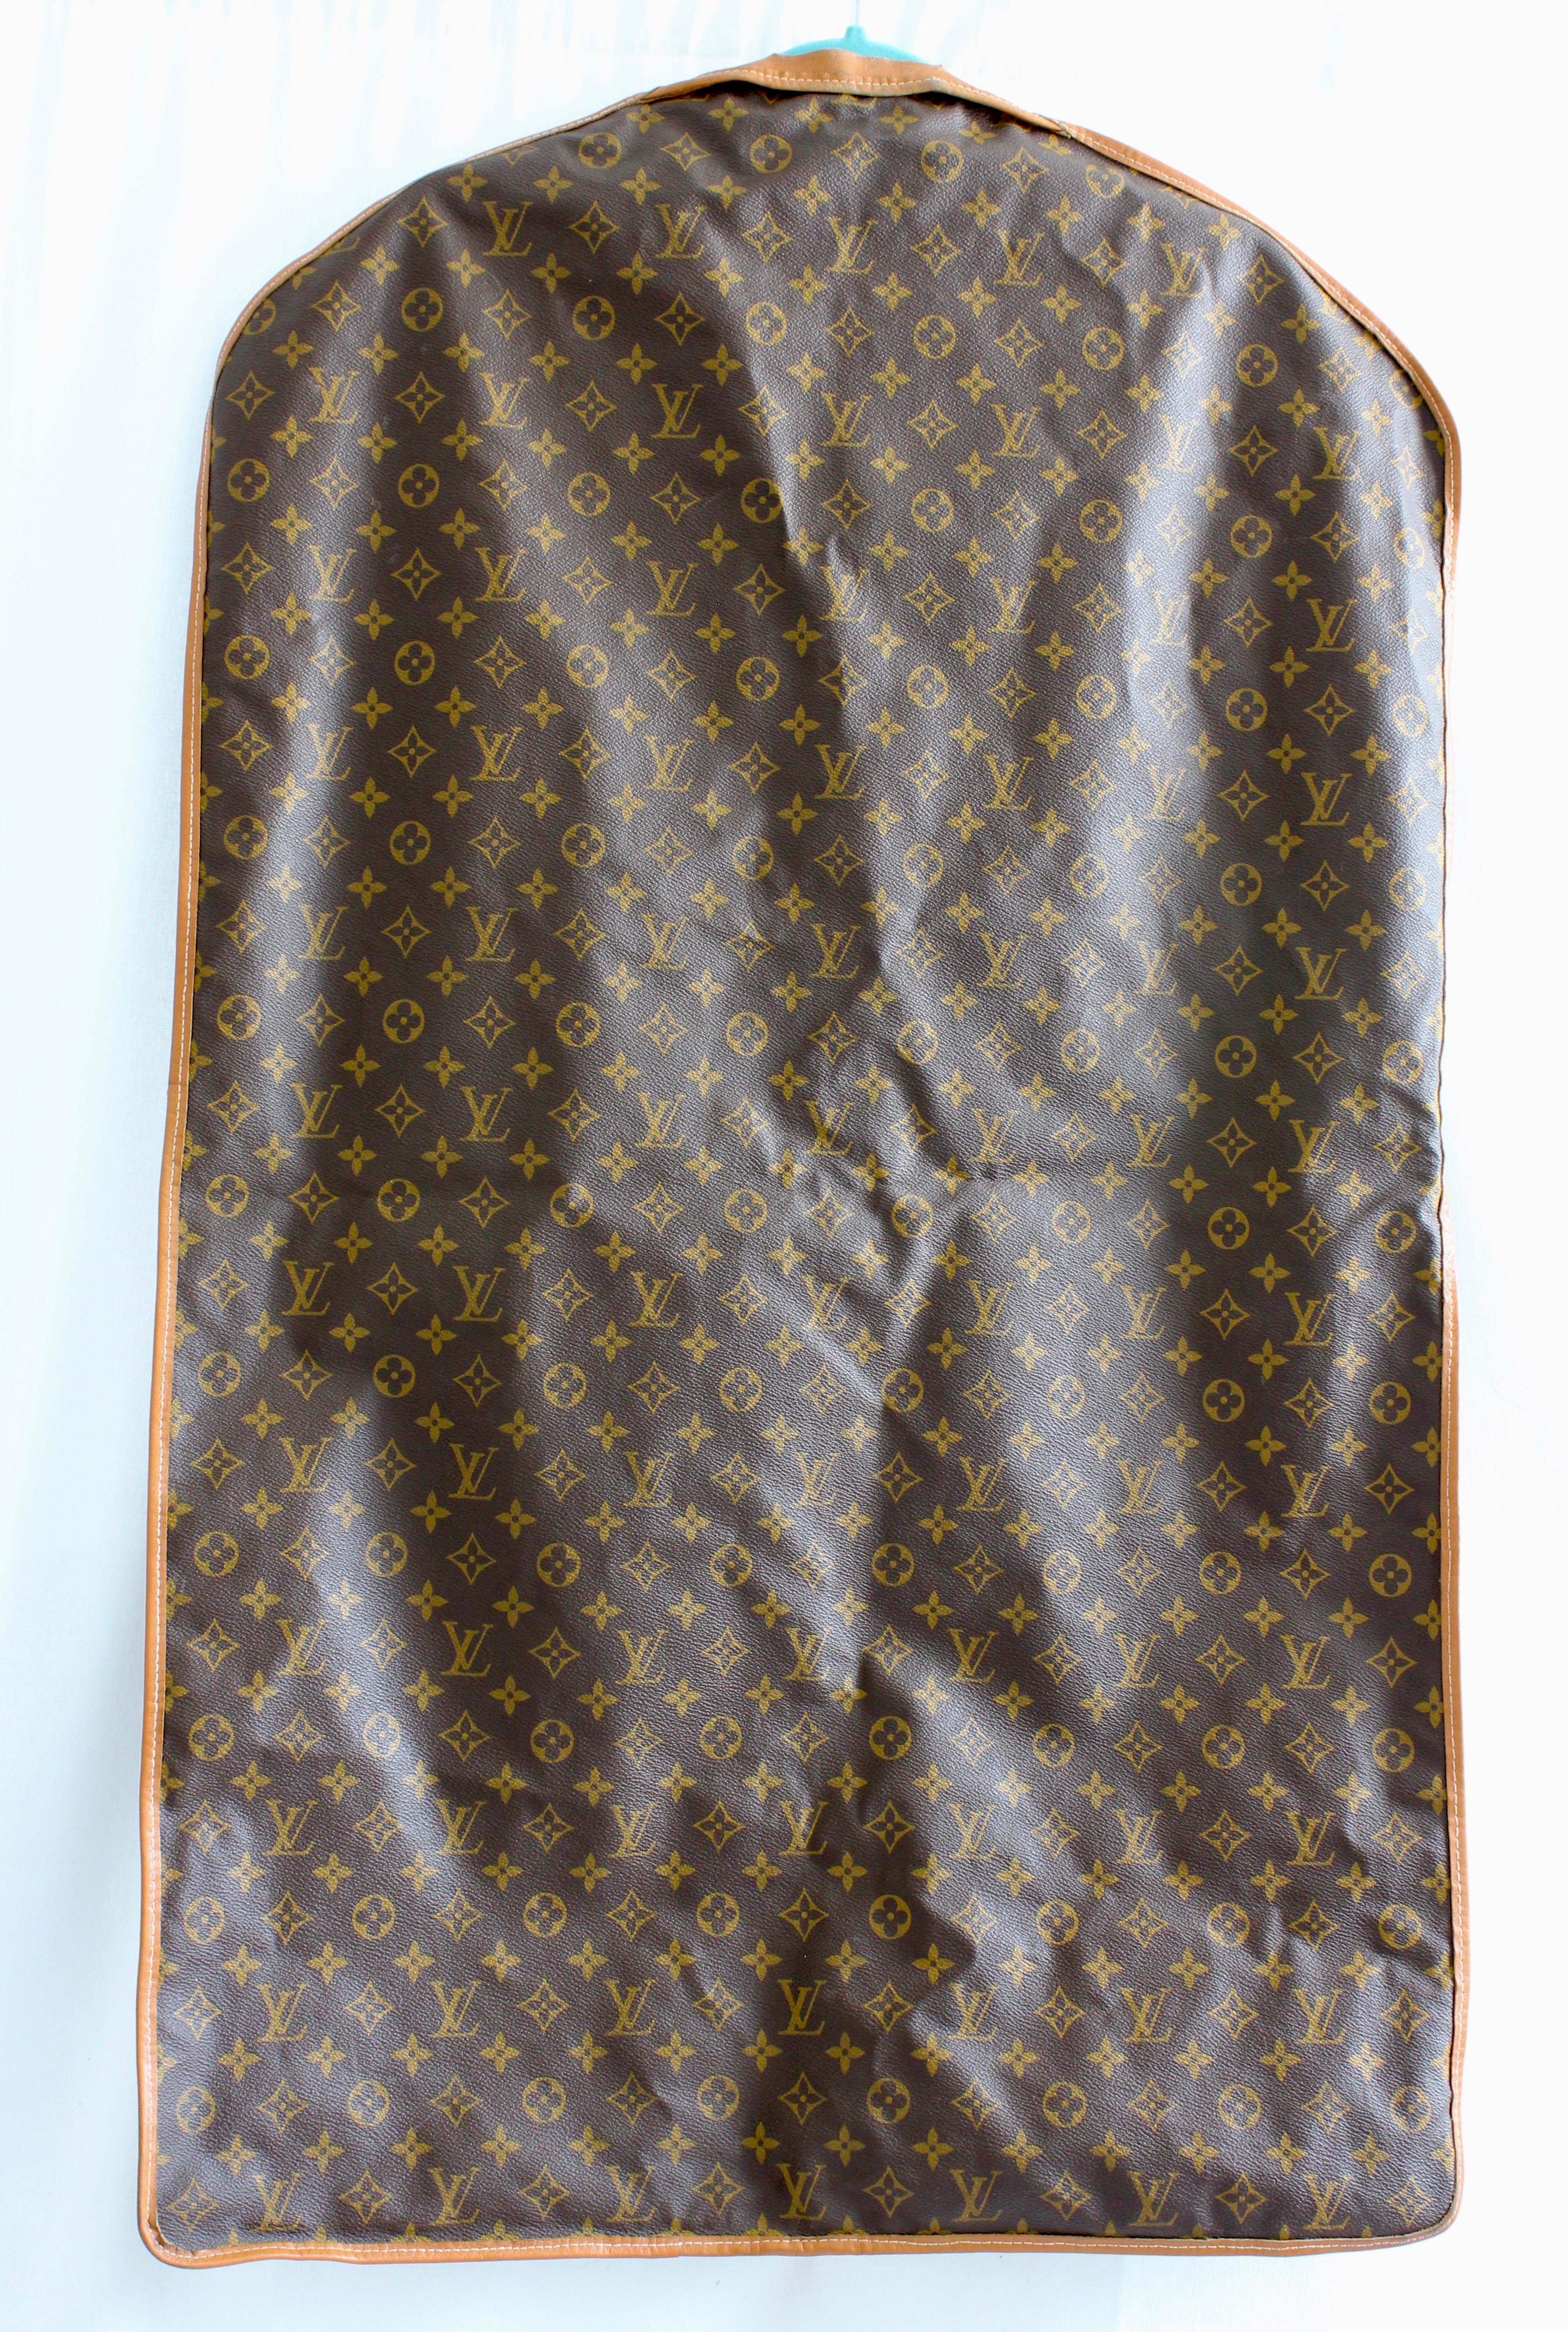 Here's a chic little garment bag made by The French Company and Louis Vuitton for Saks Fifth Avenue, most likely made in the 1970s.  Made from their signature monogram canvas, it's trimmed in leather and features a leather loop at one end and an